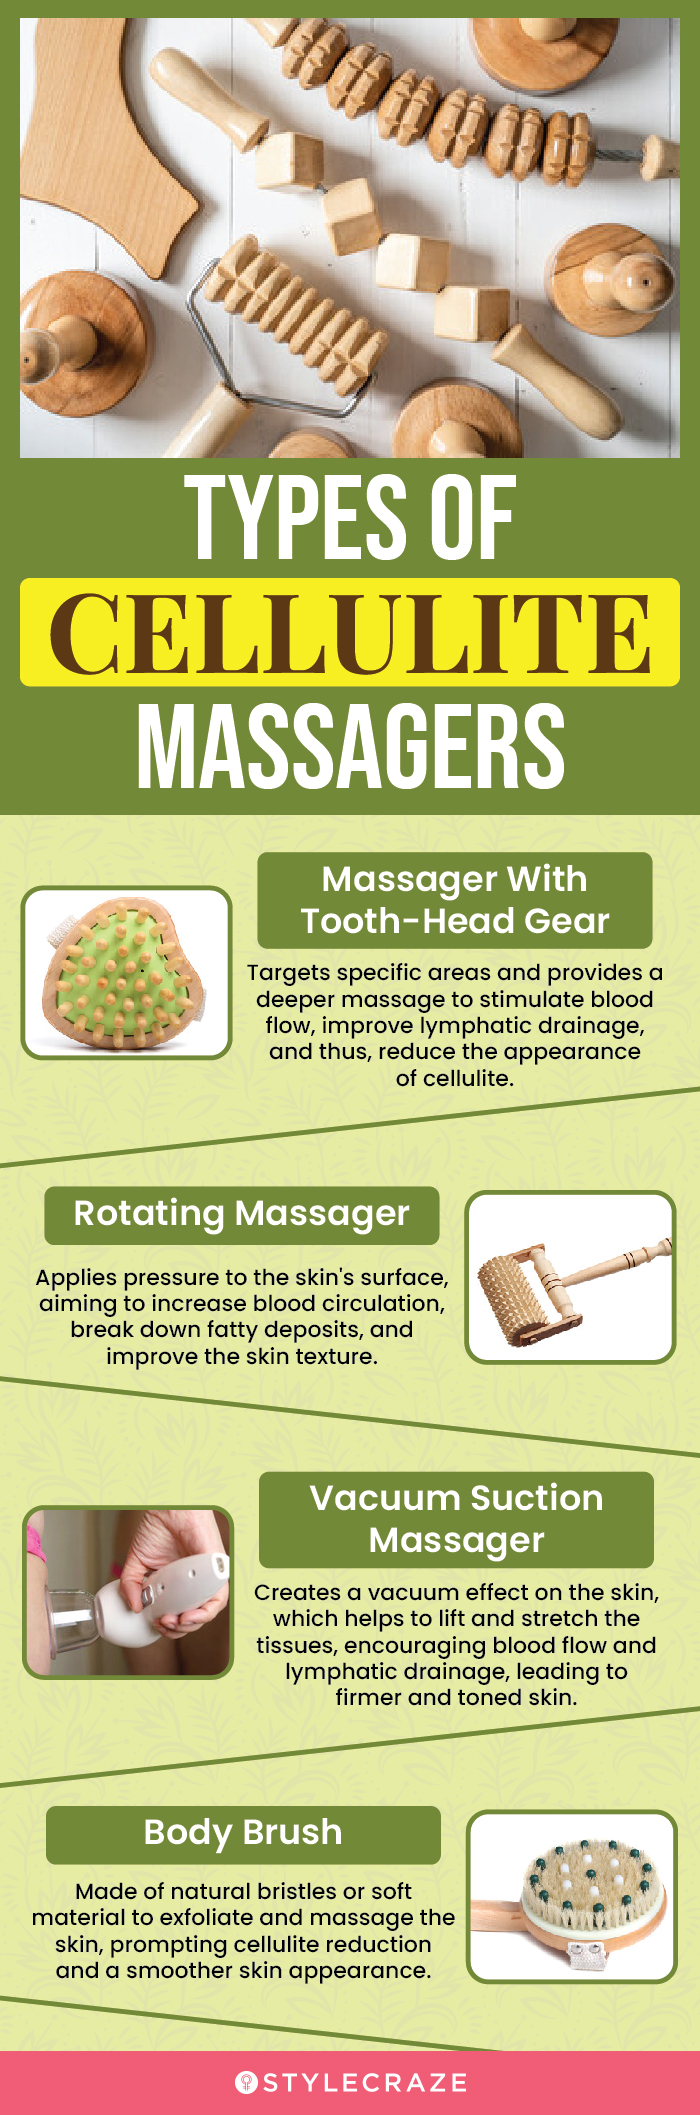 Types Of Cellulite Massagers(infographic)